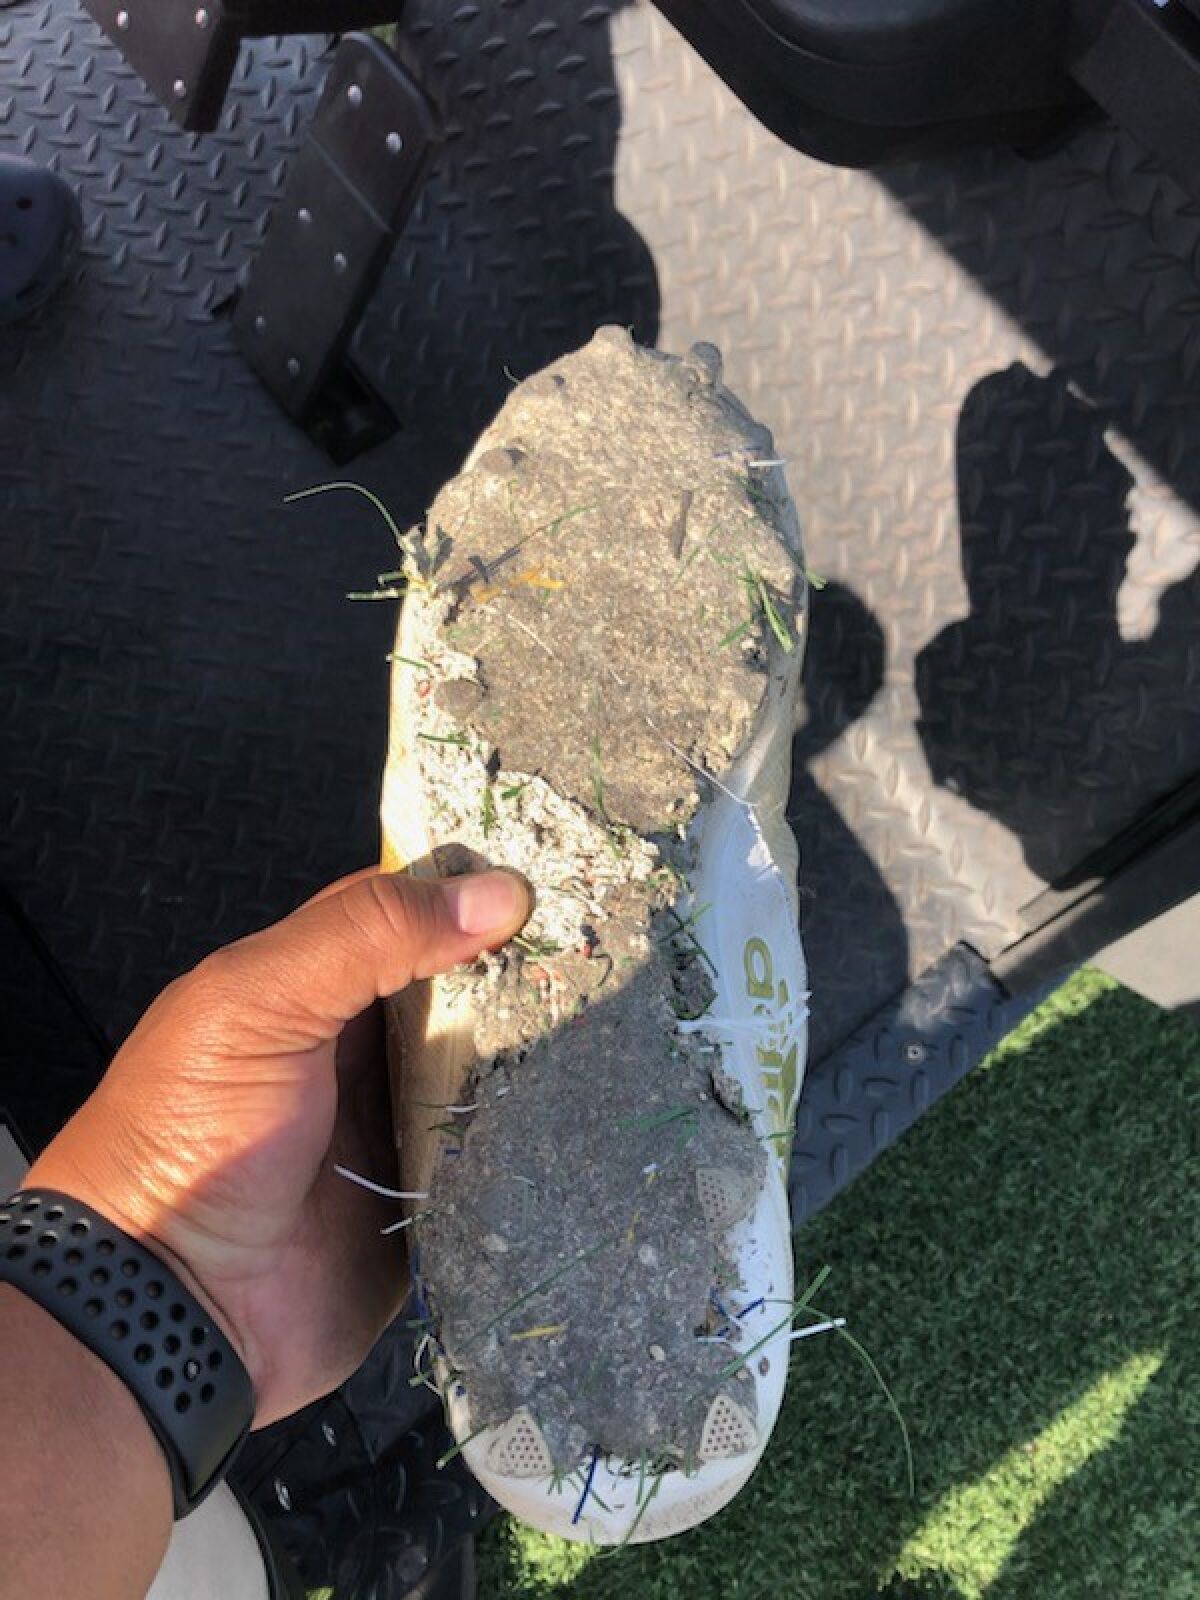 A cleat is covered with the strange substance from Crenshaw High's all-weather turf field.